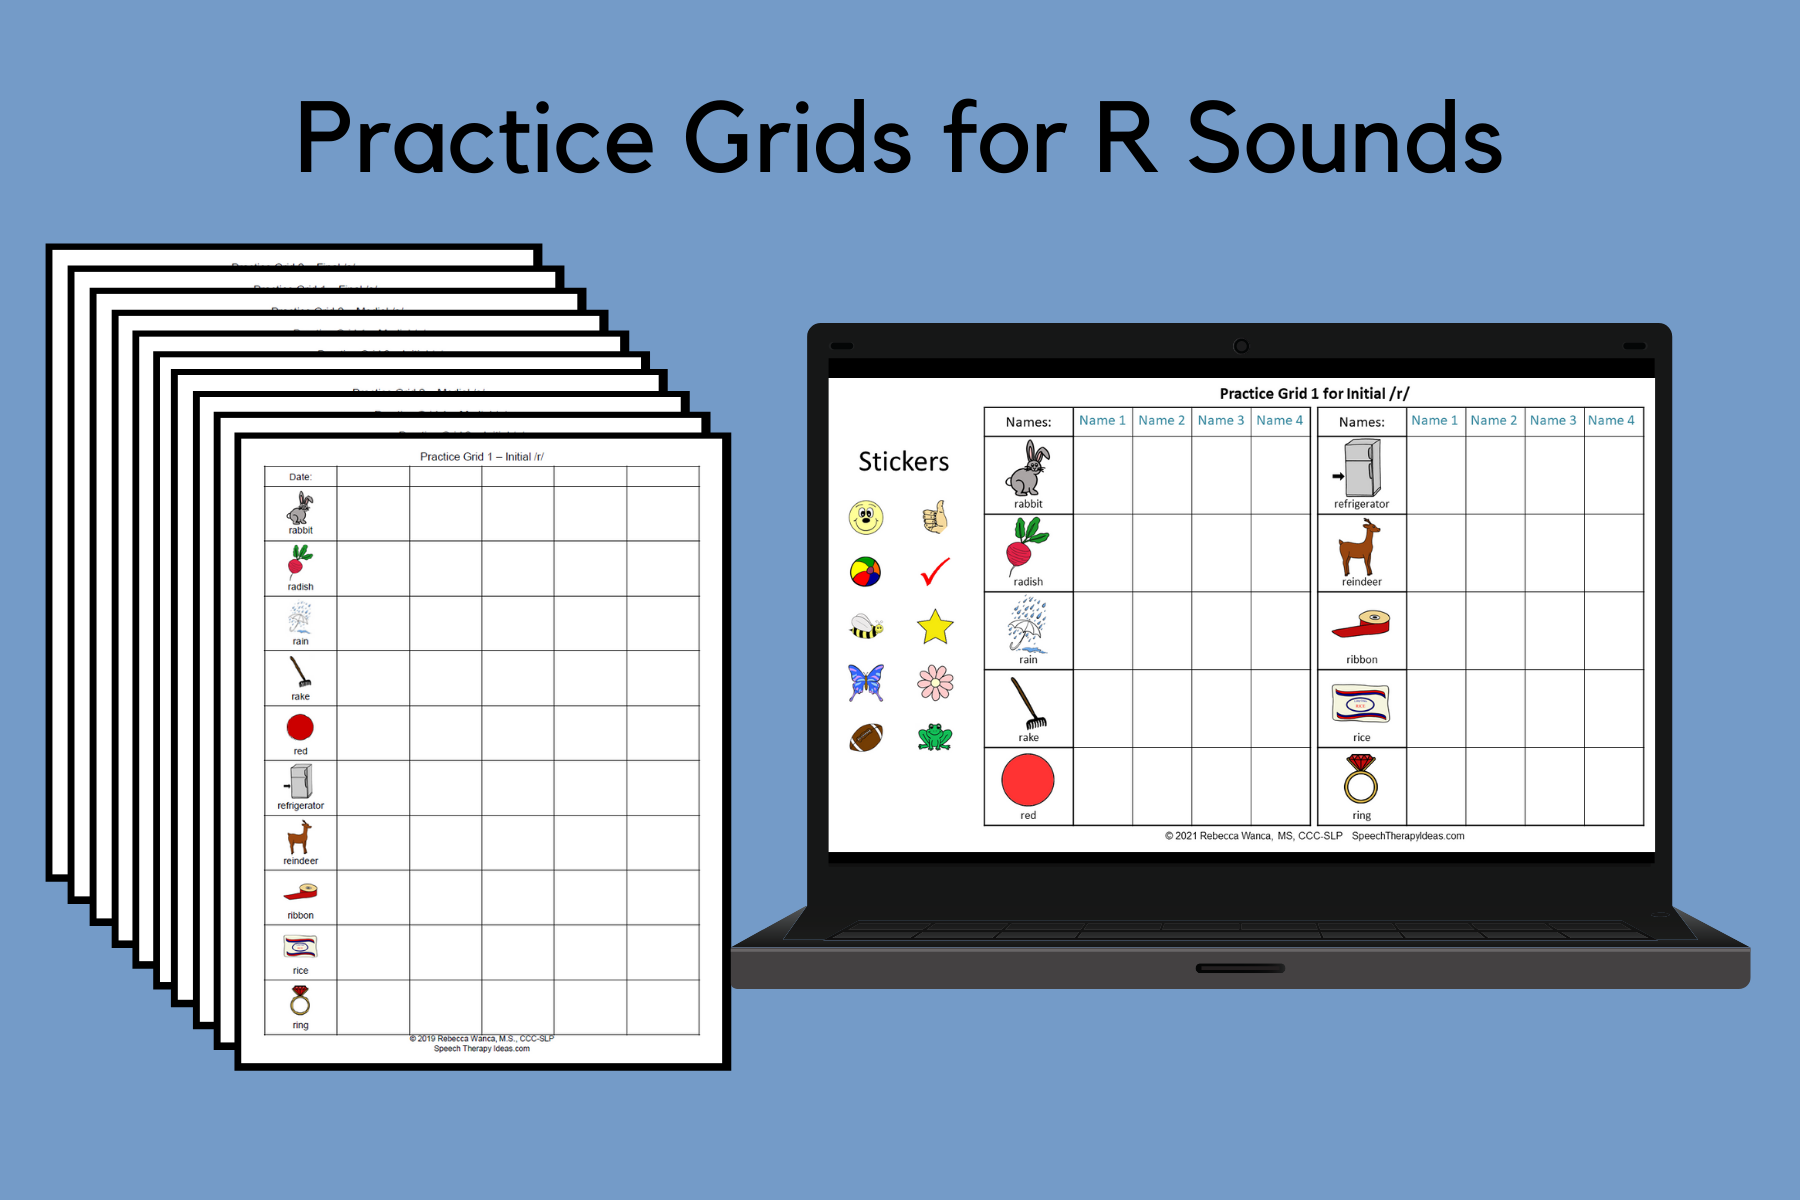 Practice Grids for R Sounds